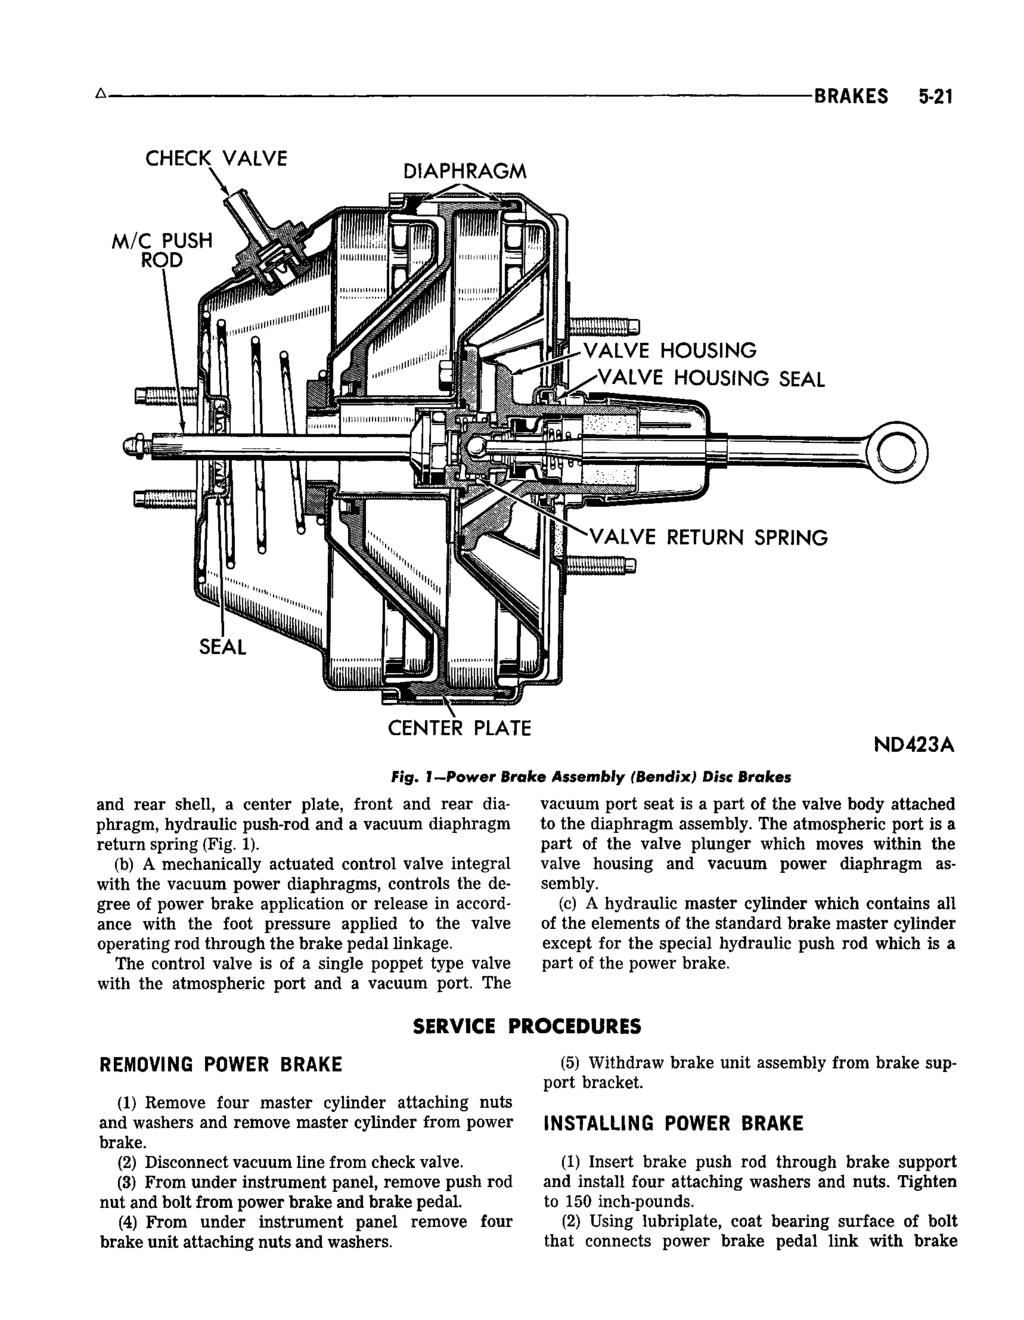 A BRAKES 5-21 CHECK VALVE DIAPHRAGM M/C PUSH ROD CENTER PLATE and rear shell, a center plate, front and rear diaphragm, hydraulic push-rod and a vacuum diaphragm return spring (Fig. 1).